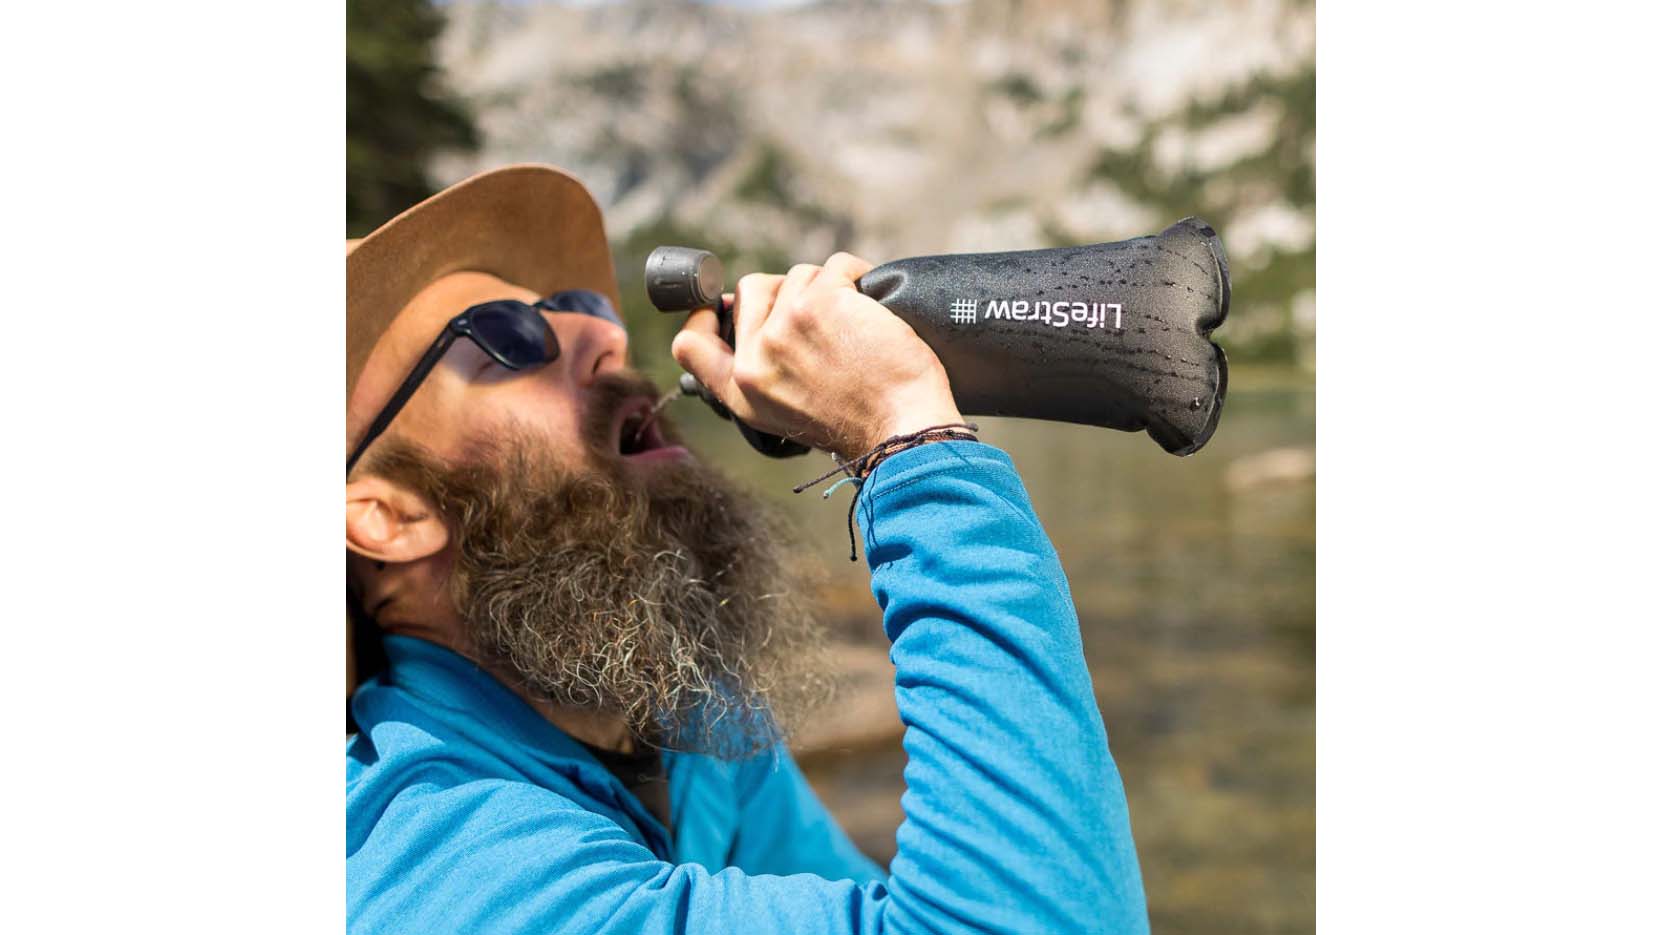 LifeStraw Peak Series Collapsible Squeeze Bottle review